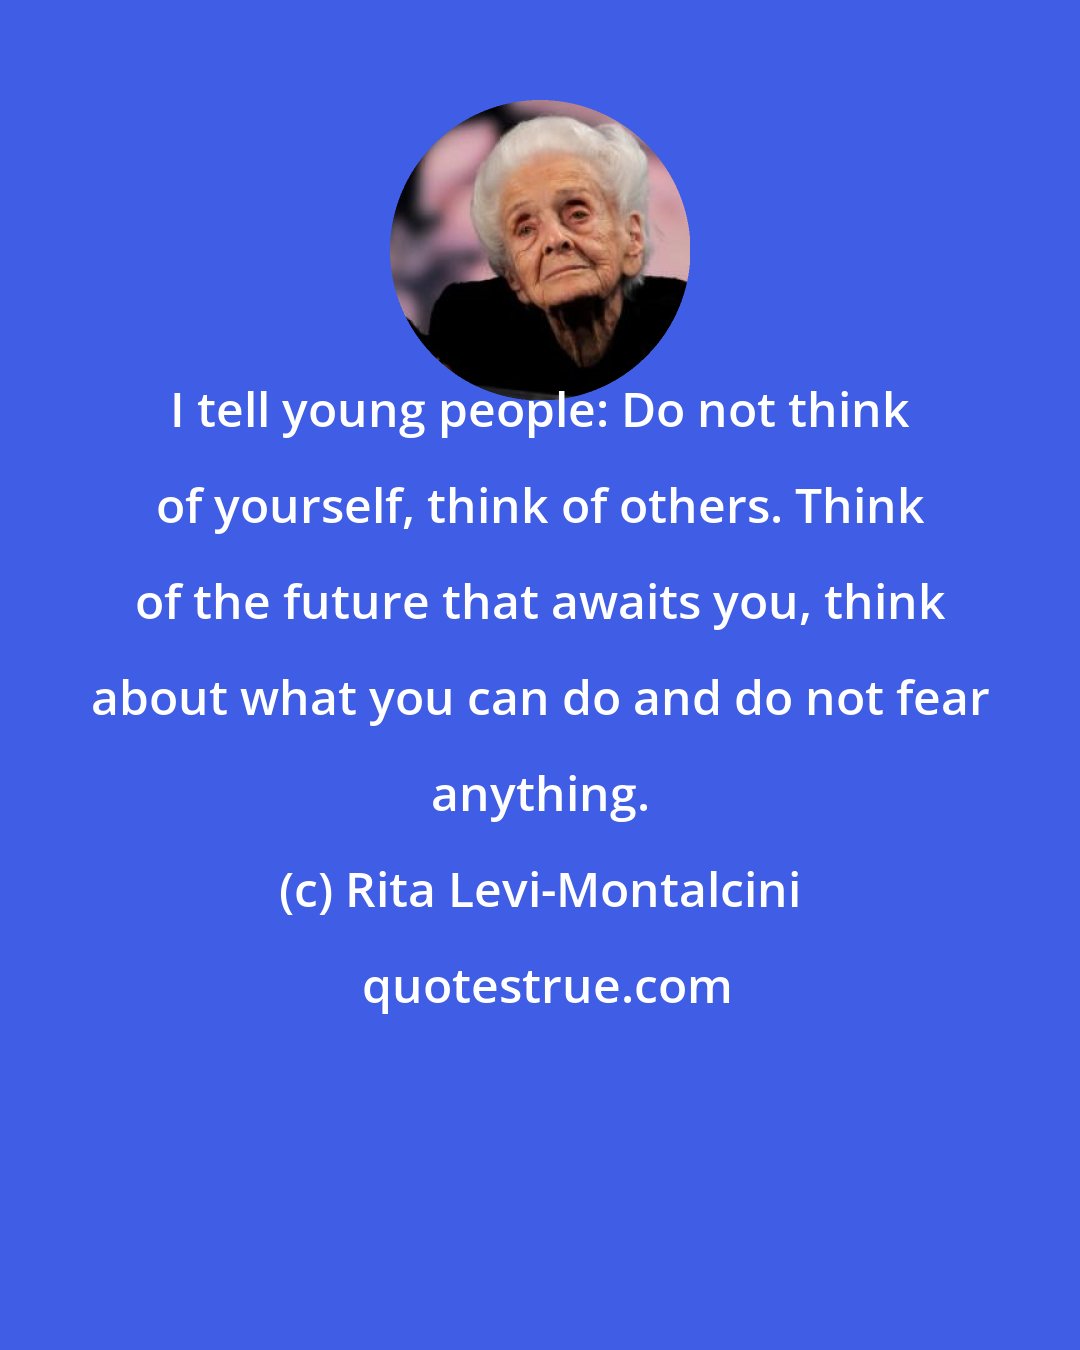 Rita Levi-Montalcini: I tell young people: Do not think of yourself, think of others. Think of the future that awaits you, think about what you can do and do not fear anything.